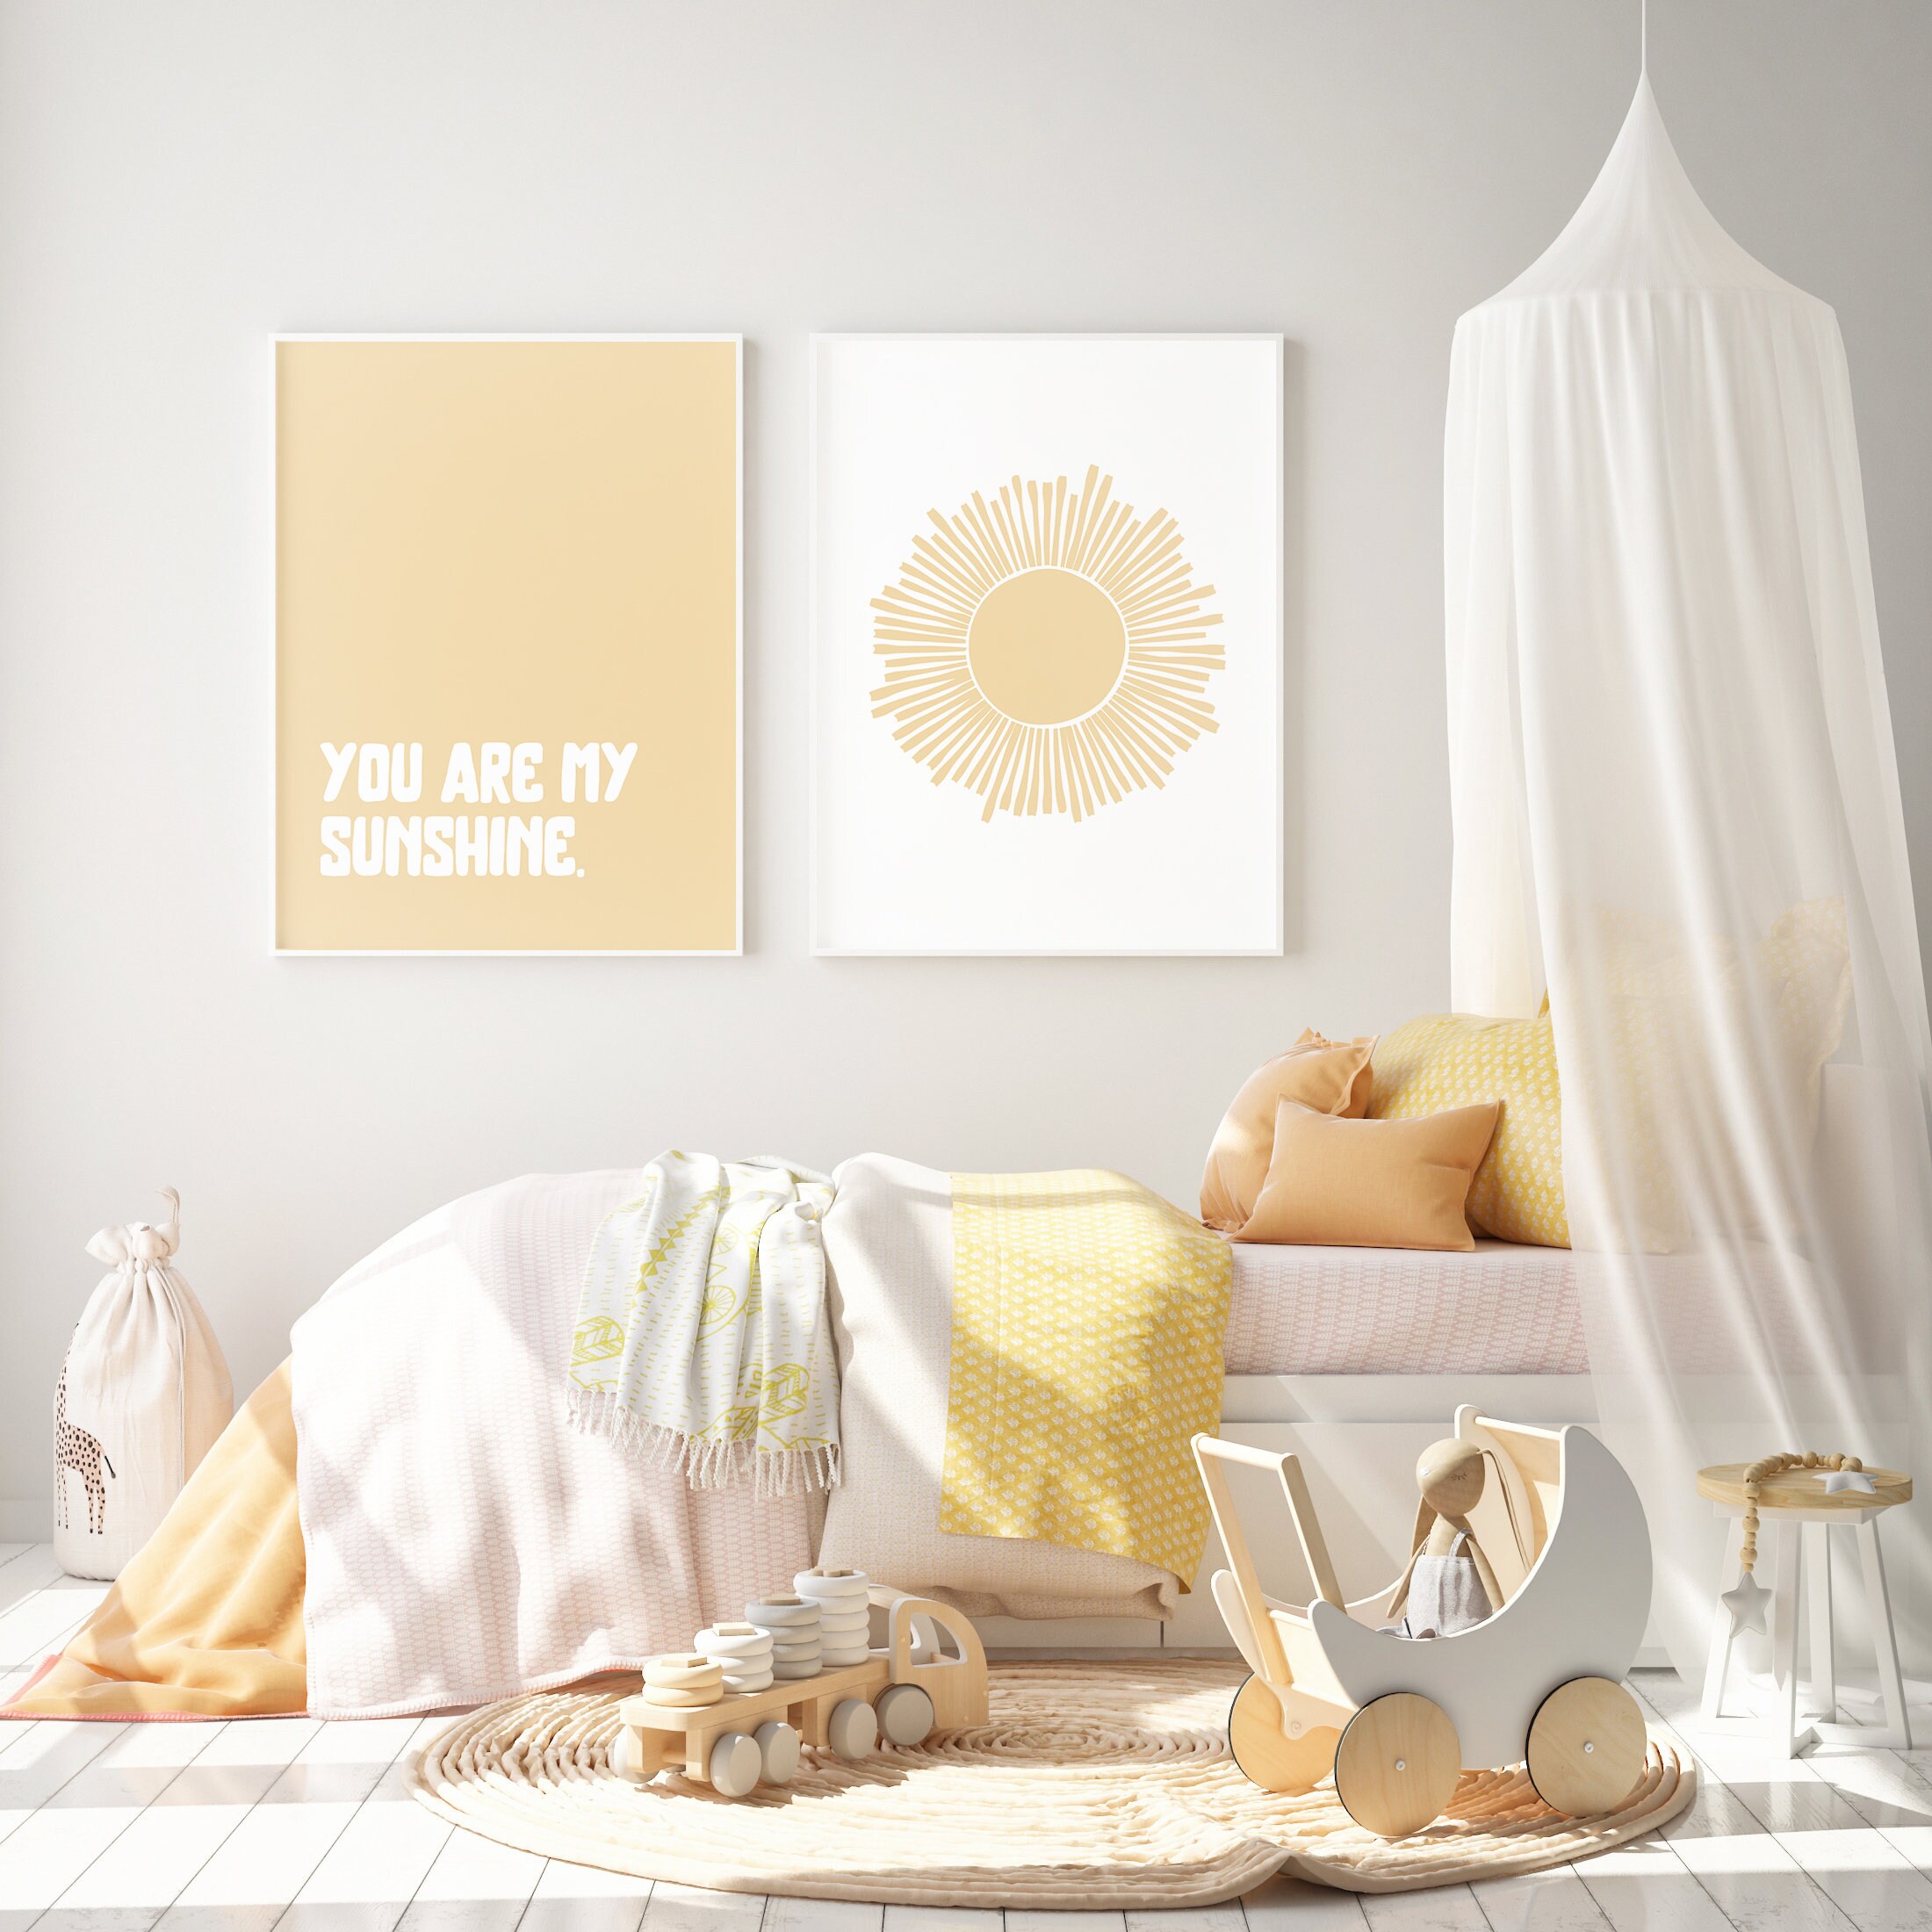 New View Gifts You Are My Sunshine Yellow Heart Photo Album